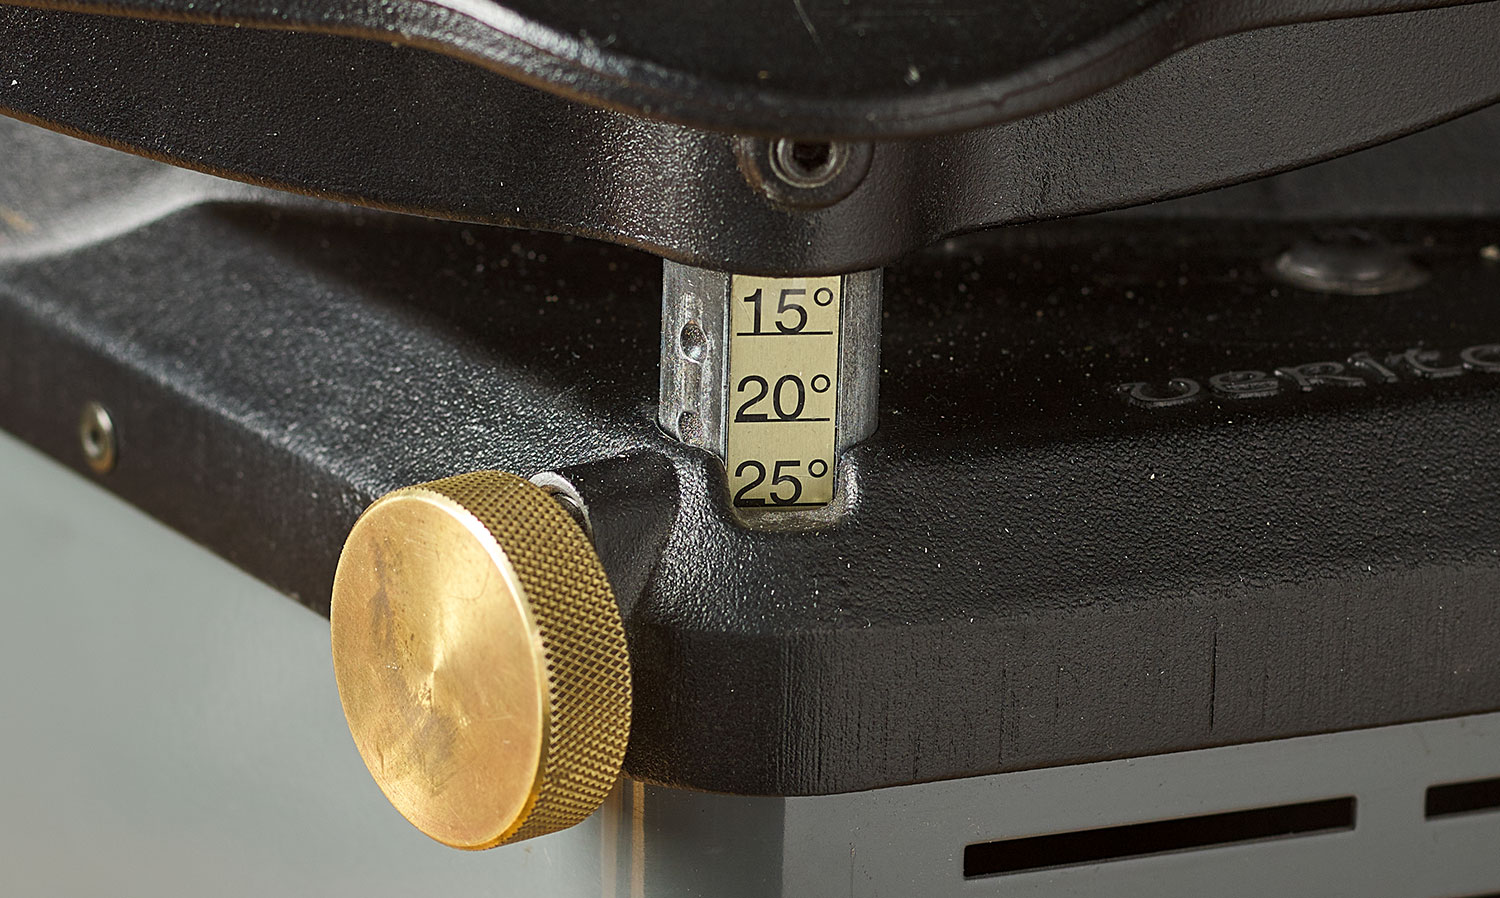 A close-up view of the graduated tool rest post of the Veritas Mk.II power sharpening system.